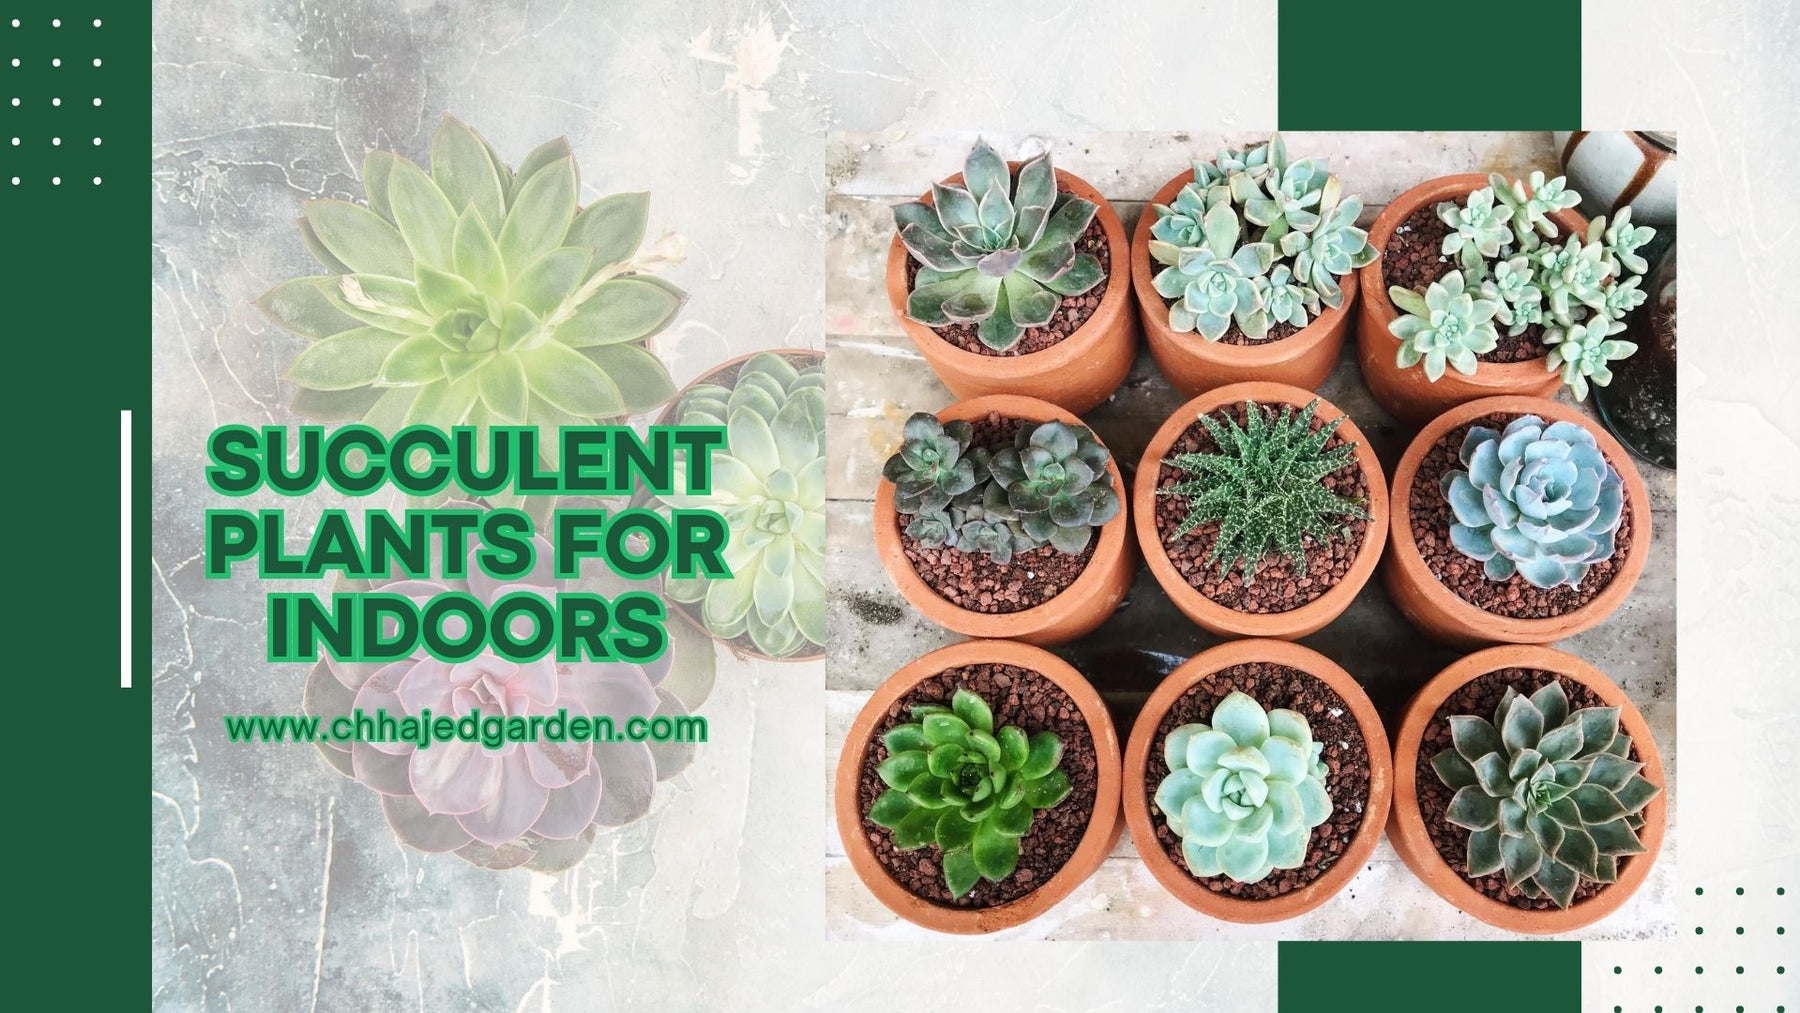 Succulent Plants for Indoors: 30 Best Varieties for Your Home